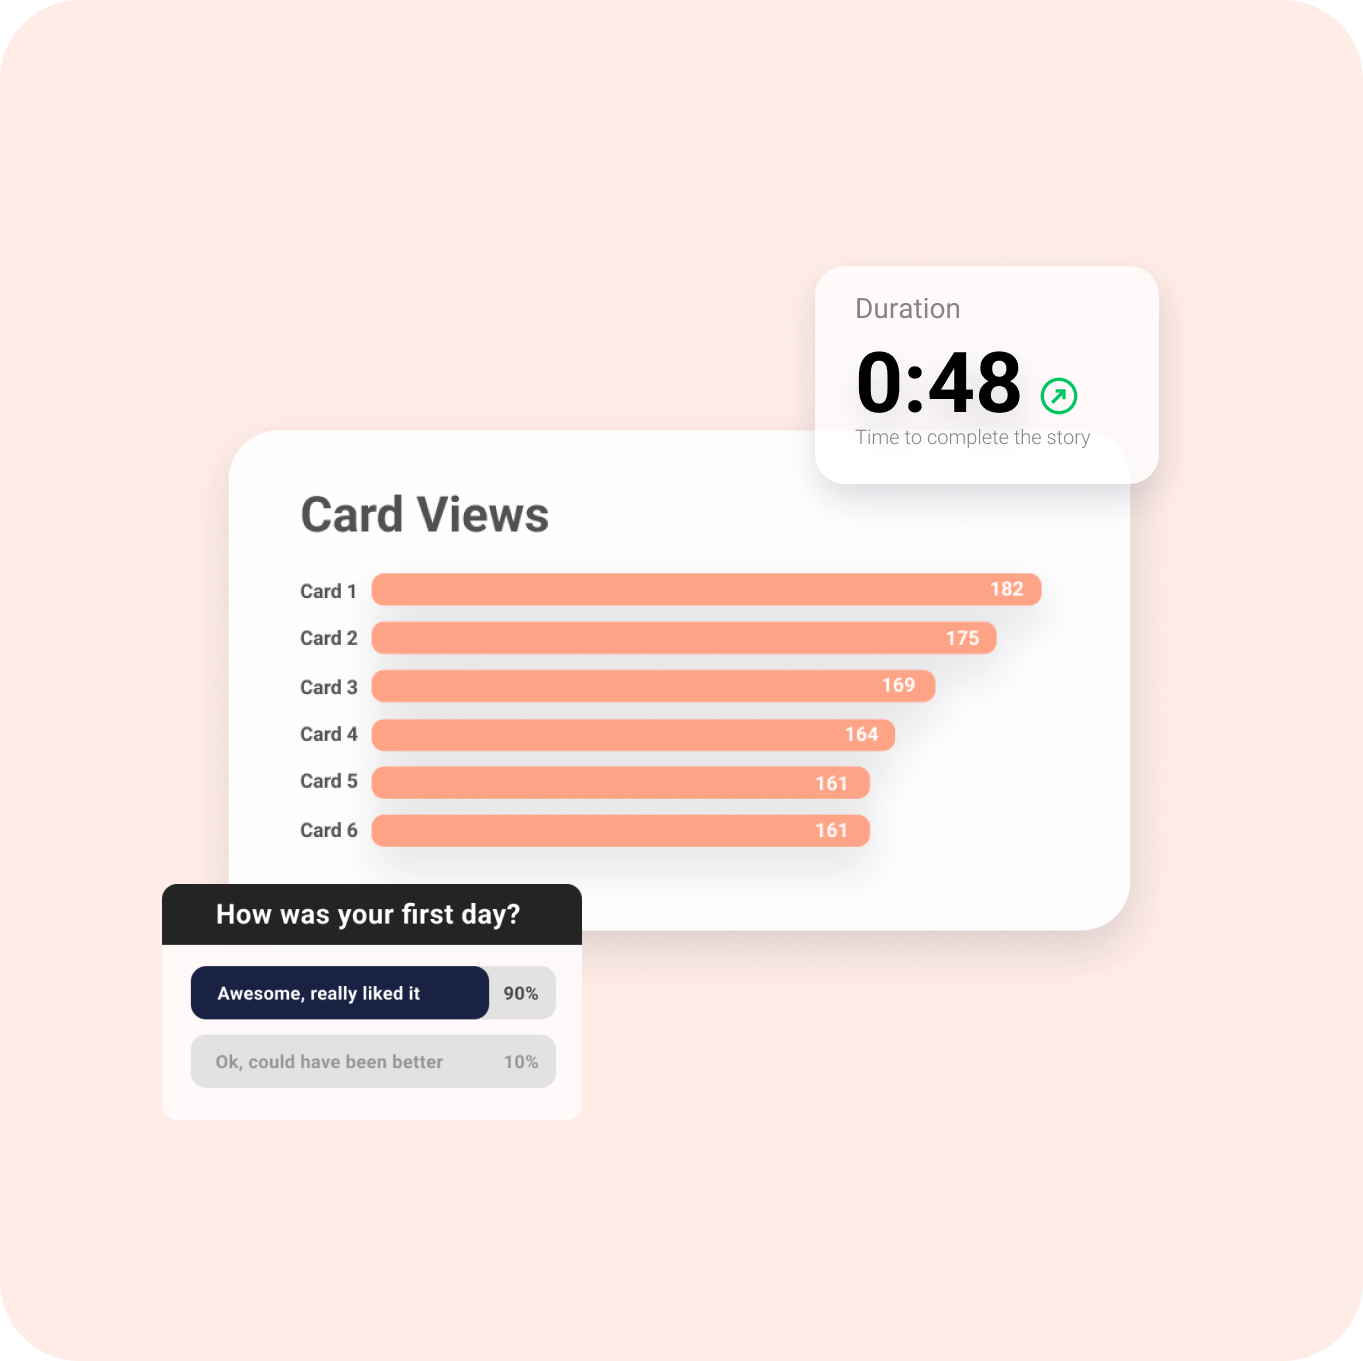 Visuals of acehub analytics data like card views or completion time